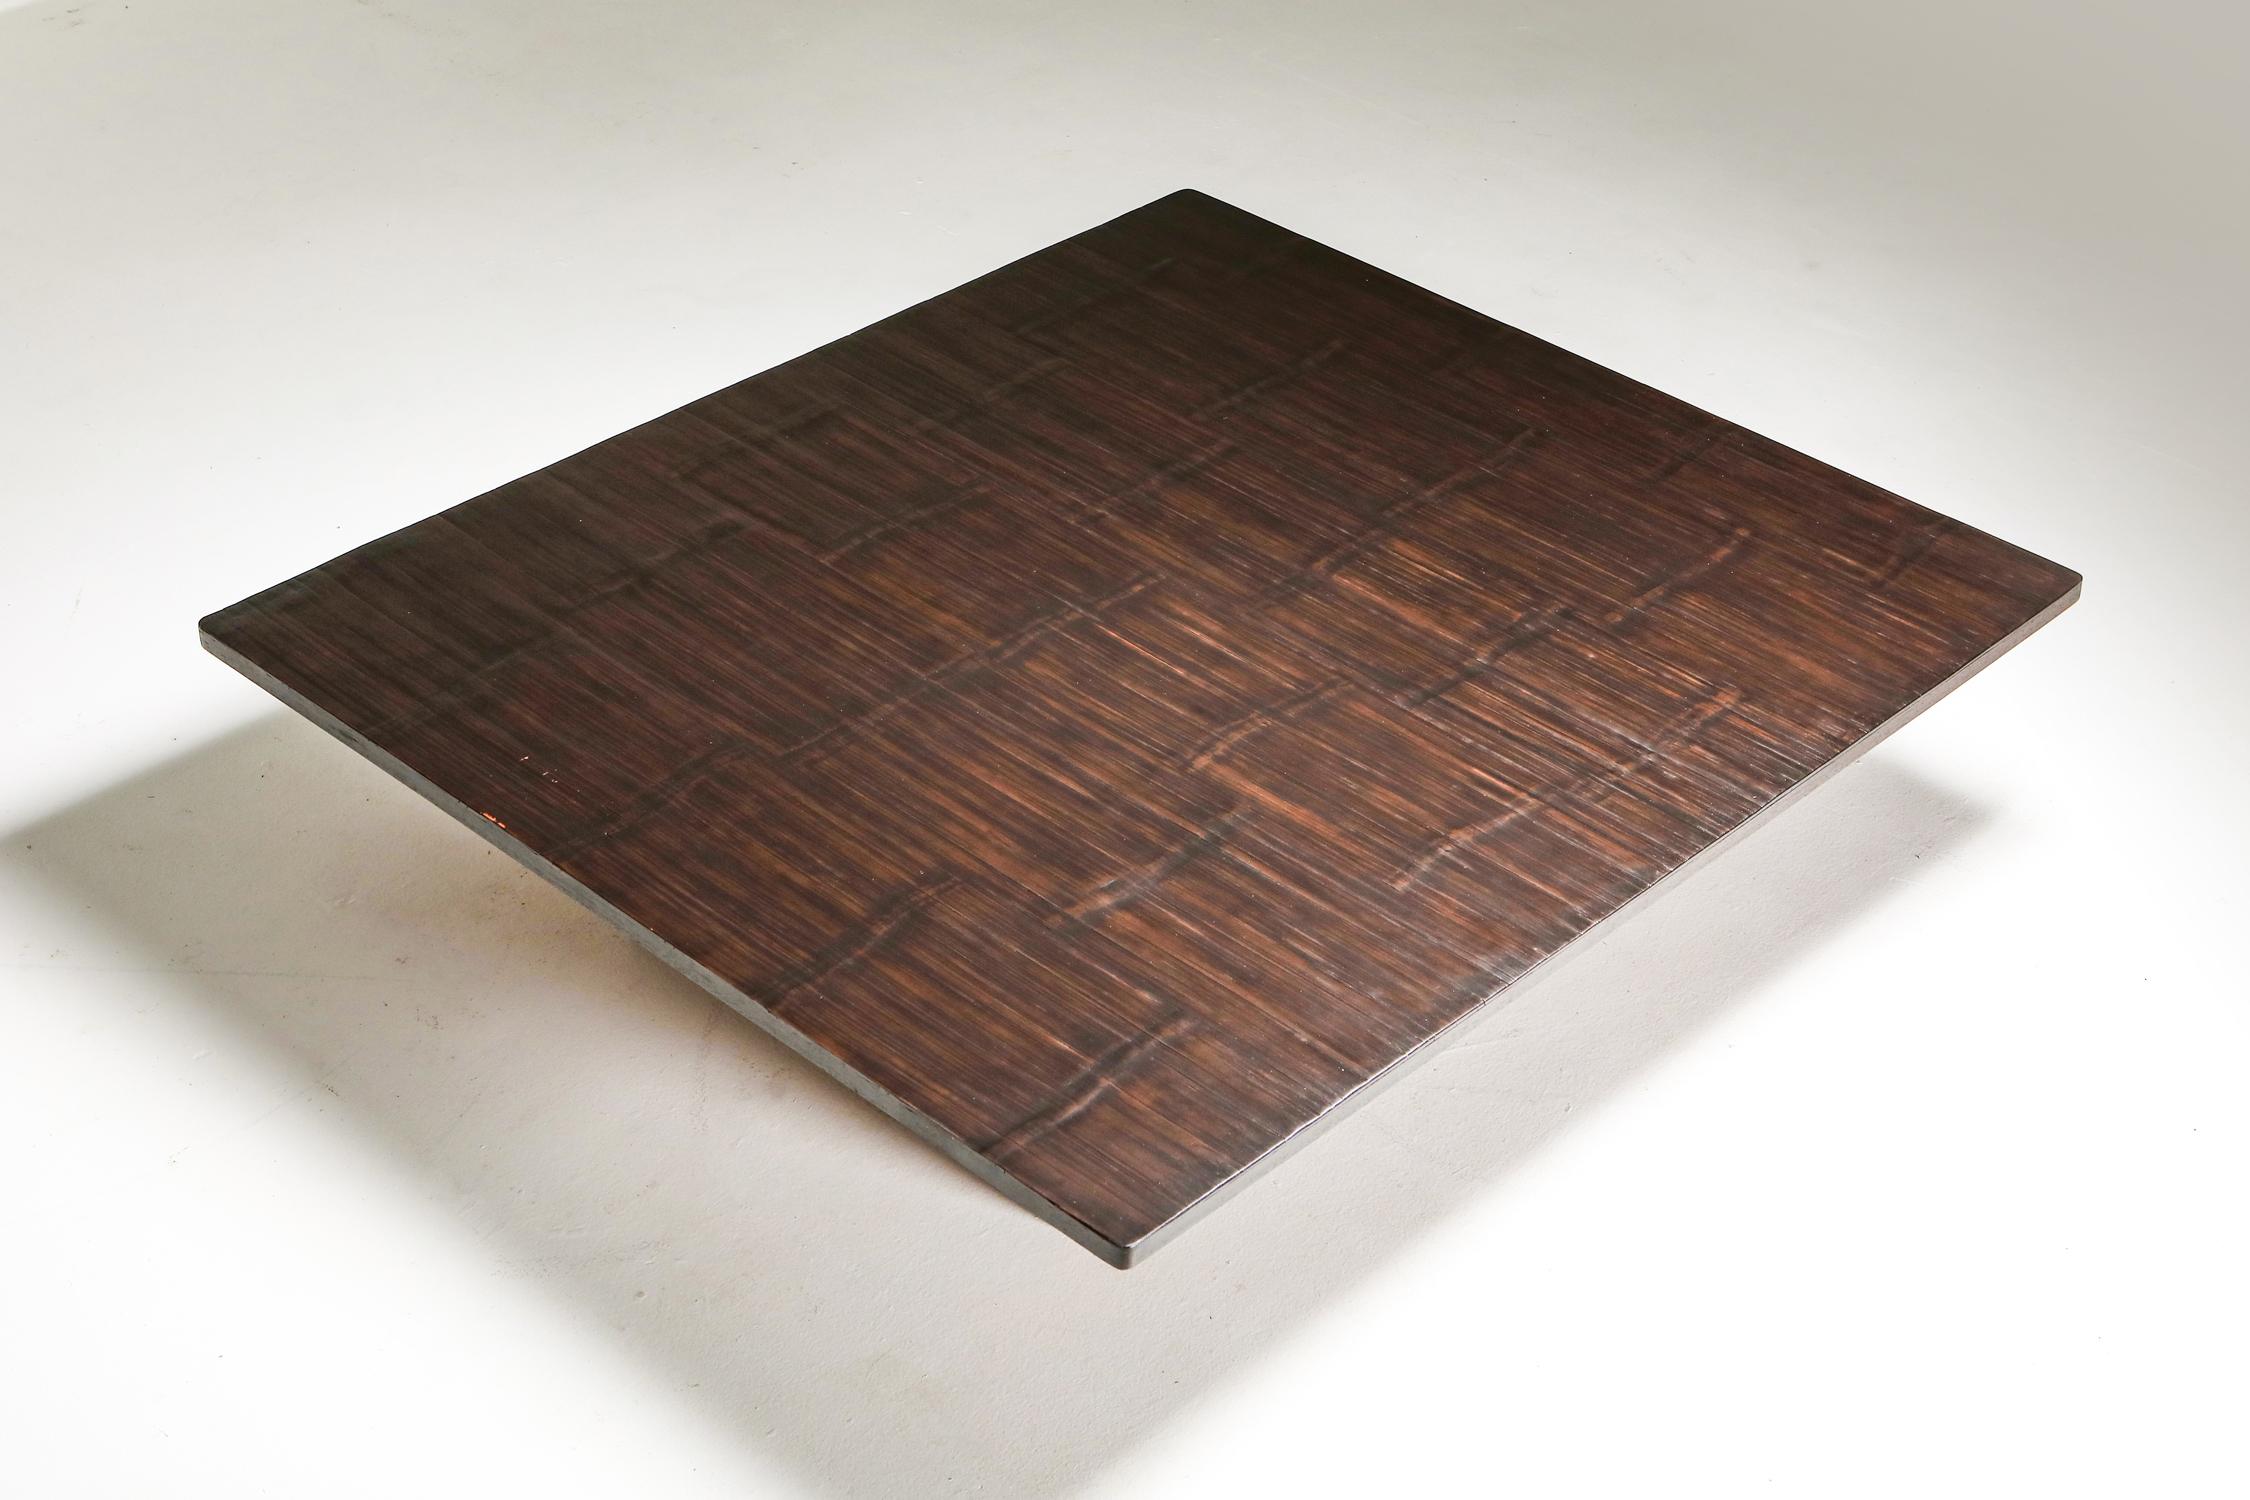 Japonisme Axel Vervoordt Wenge and Bamboo Coffee Table, 1980s